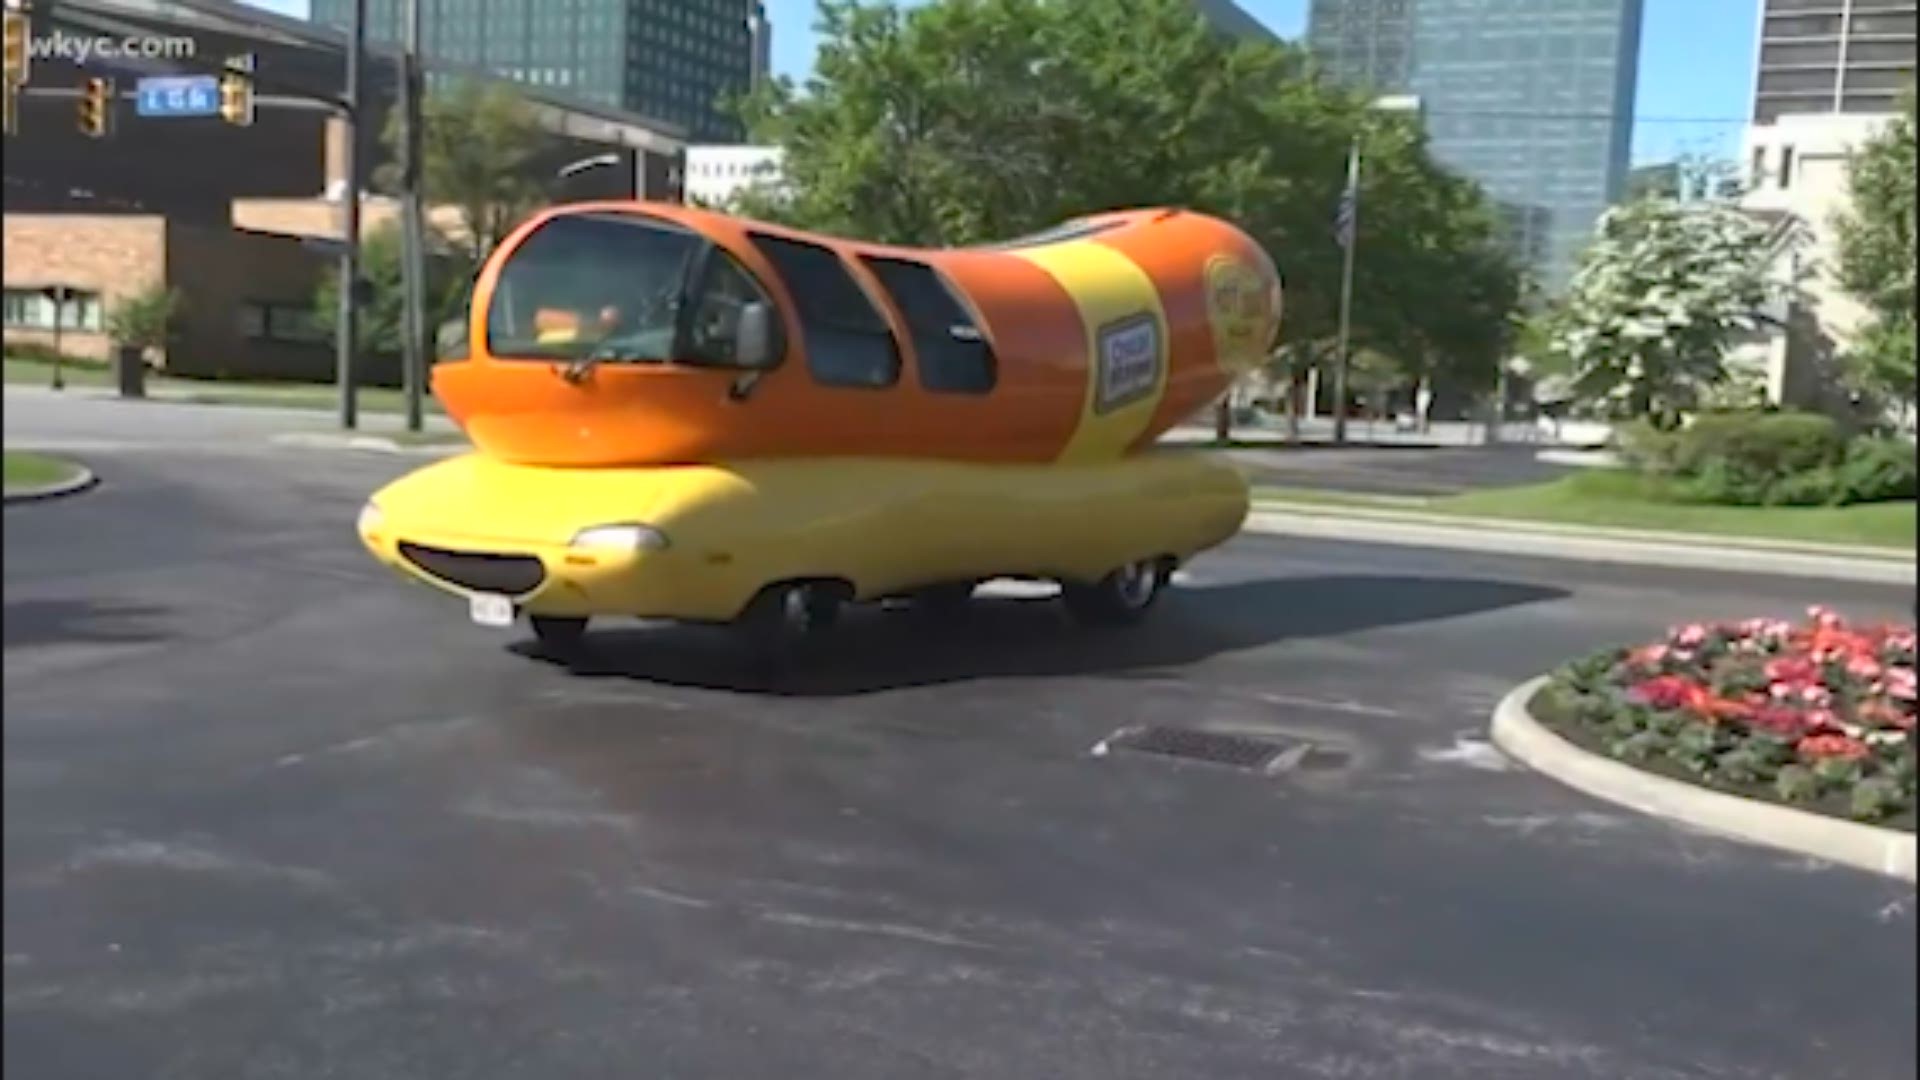 Relish in the opportunity to drive the famous Oscar Mayer Weinermobile! Digital journalist Lexi Hazlett shares more.